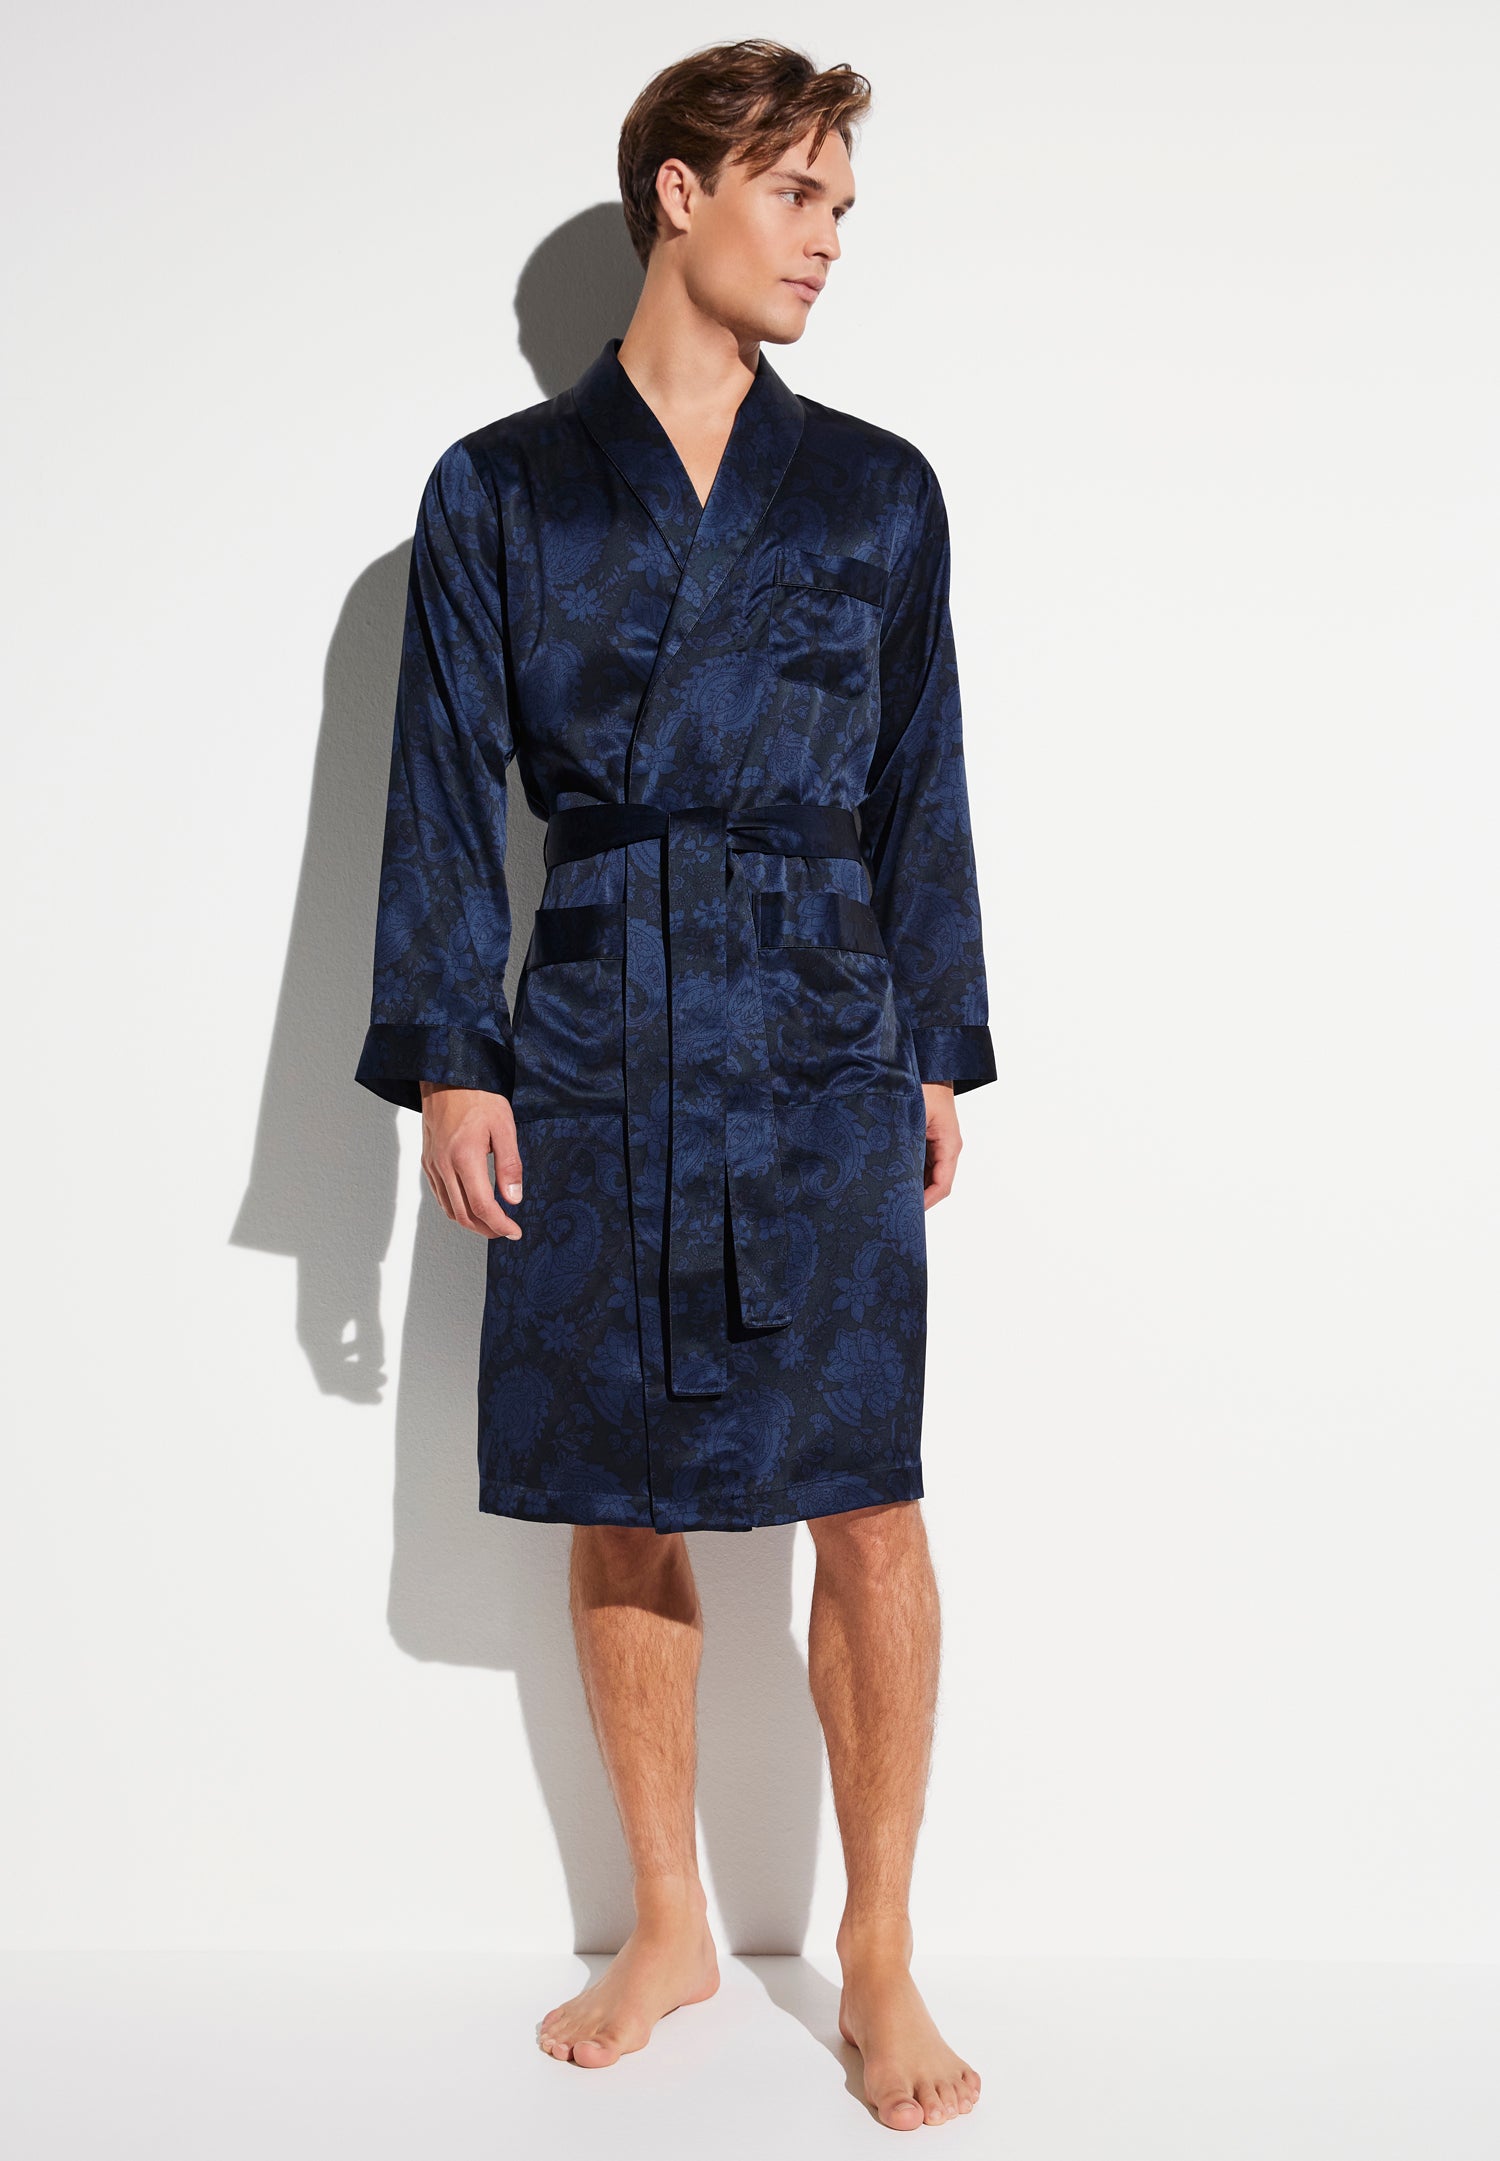 Men's Luxury Silk Dressing Gown with Gold and Dark Blue Paisley Ornaments